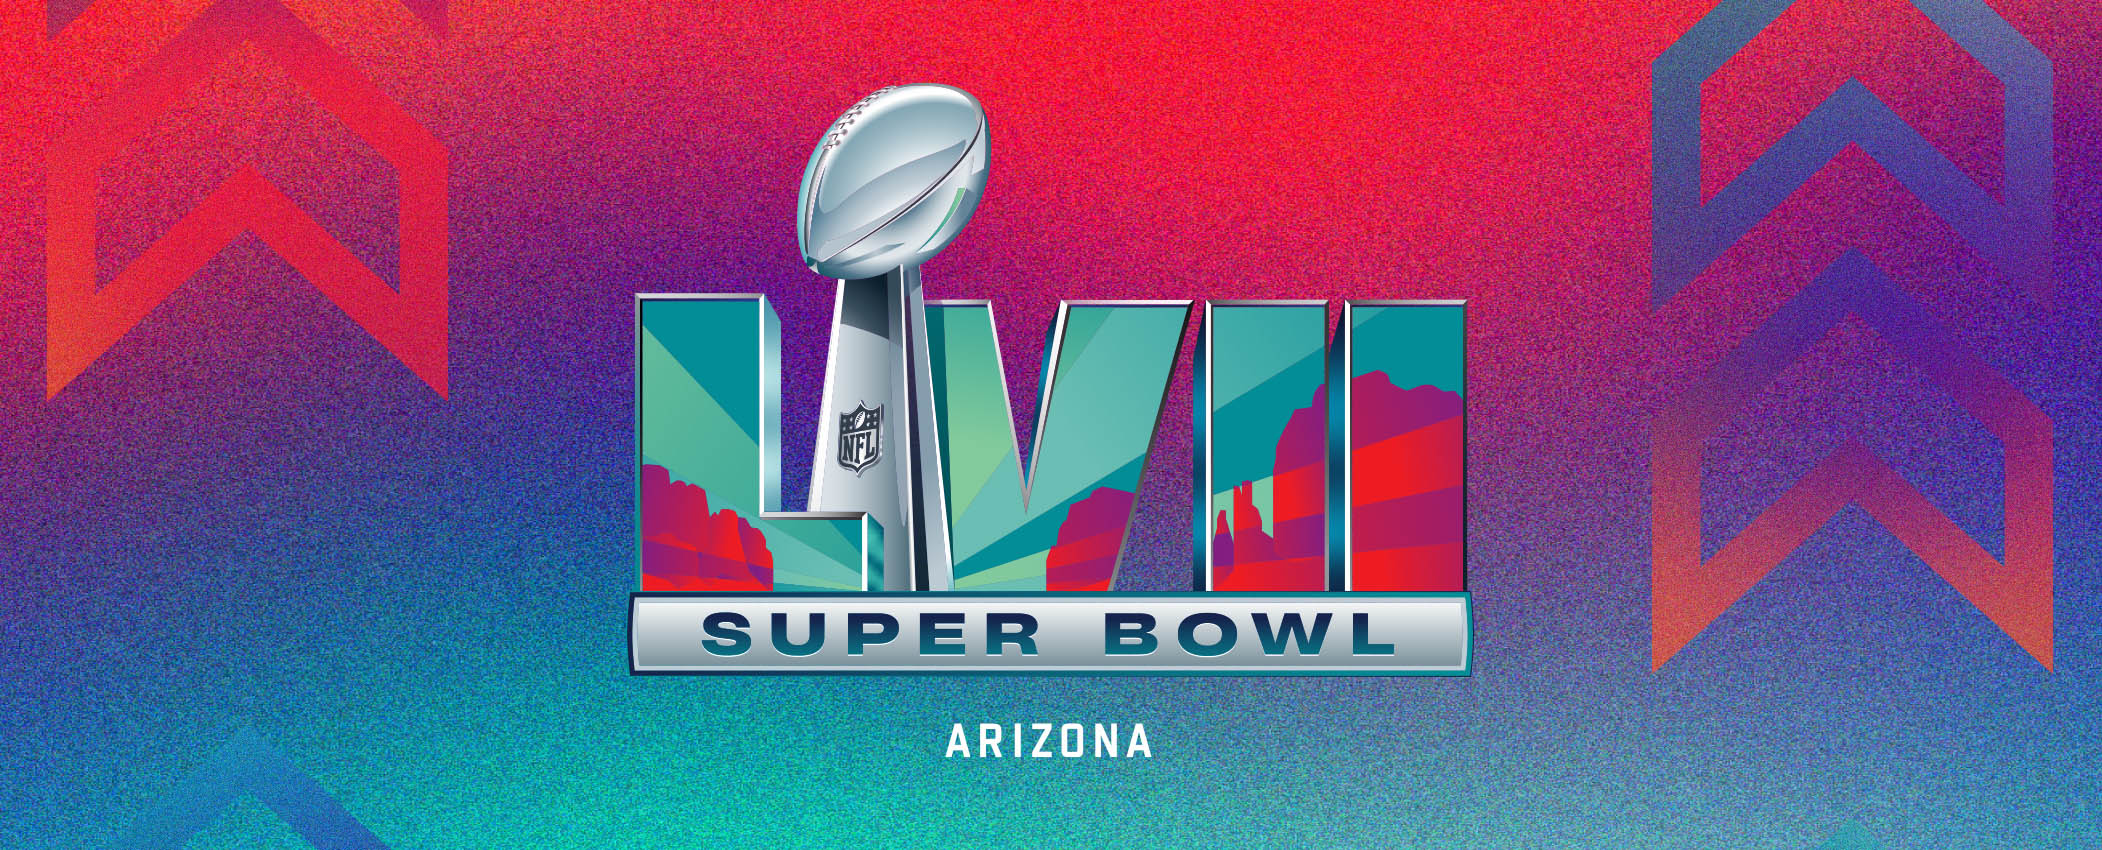 How to watch/stream Super Bowl LVII: Game time, channels and 4k/HDR coverage